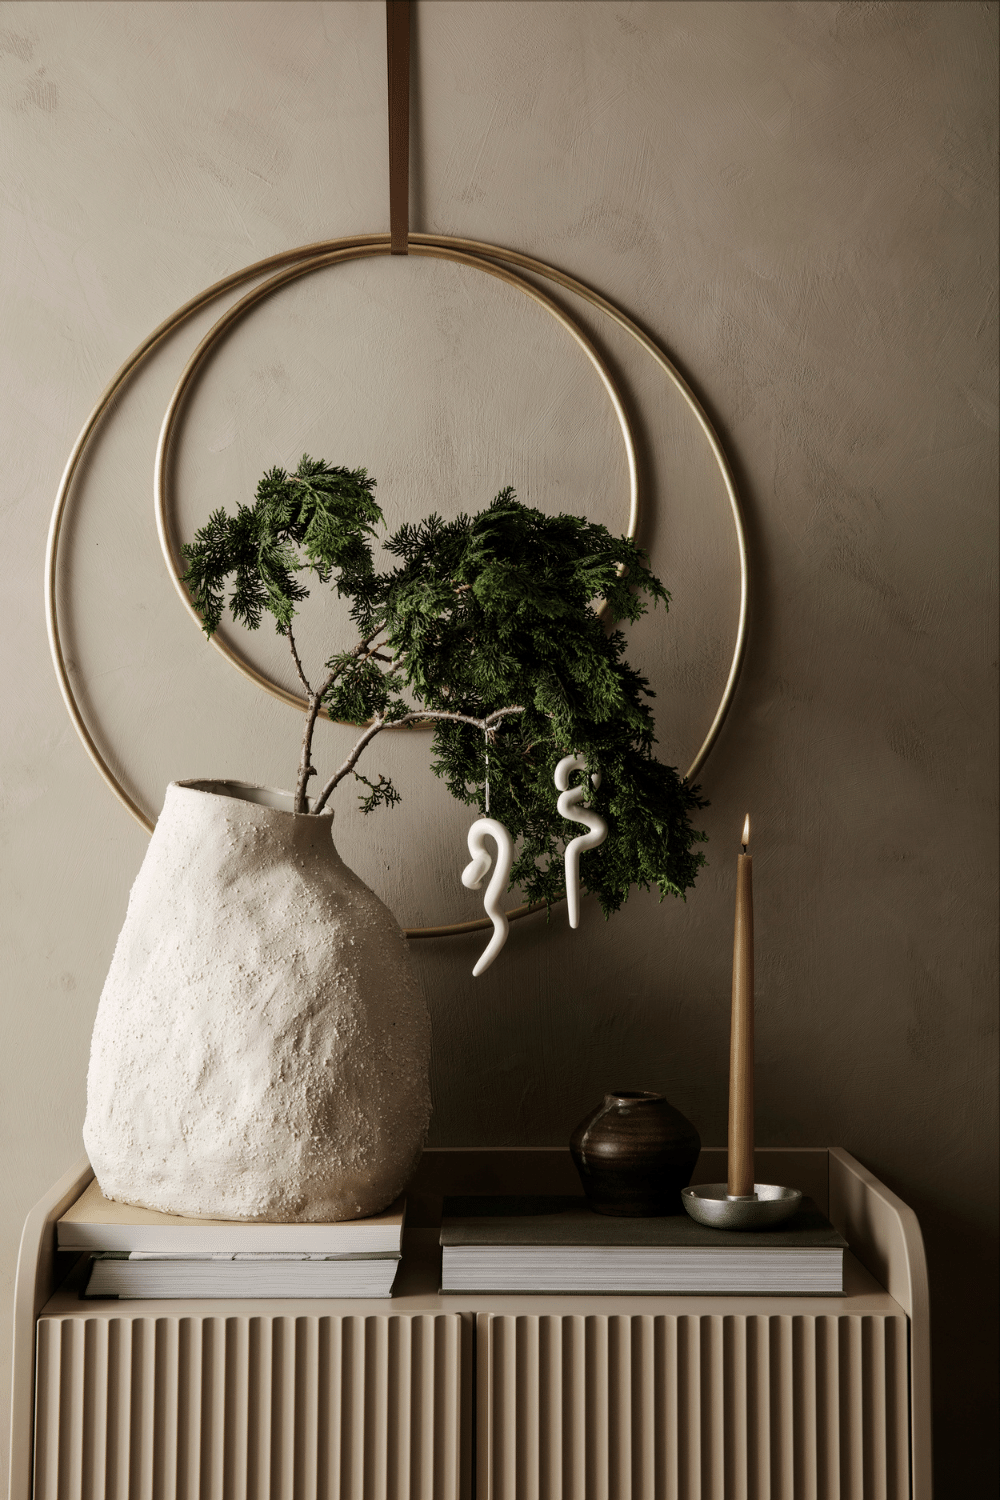 Minimal Christmas decor with foliage and branches, perfect for a Scandinavian Christmas